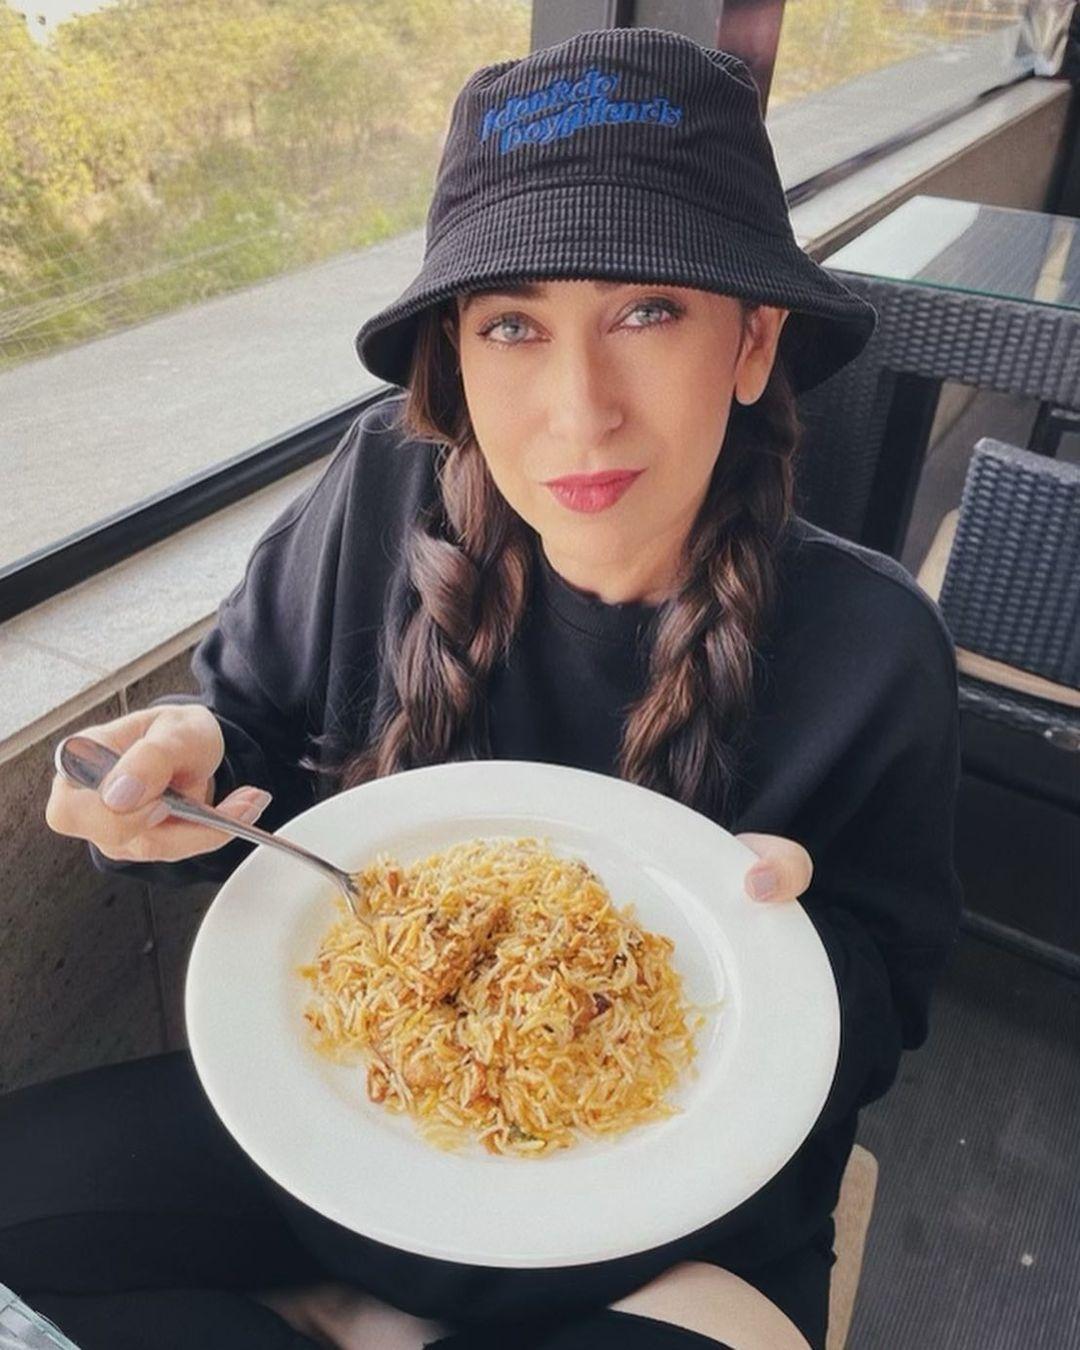 Karisma Kapoor
Karisma Kapoor loves cooking and often tries out new recipes at home, making sure they're not only tasty but also good for you. She talks about her passion for homemade meals and often posts about her kitchen adventures on Instagram, where she enjoys cooking for her loved ones.